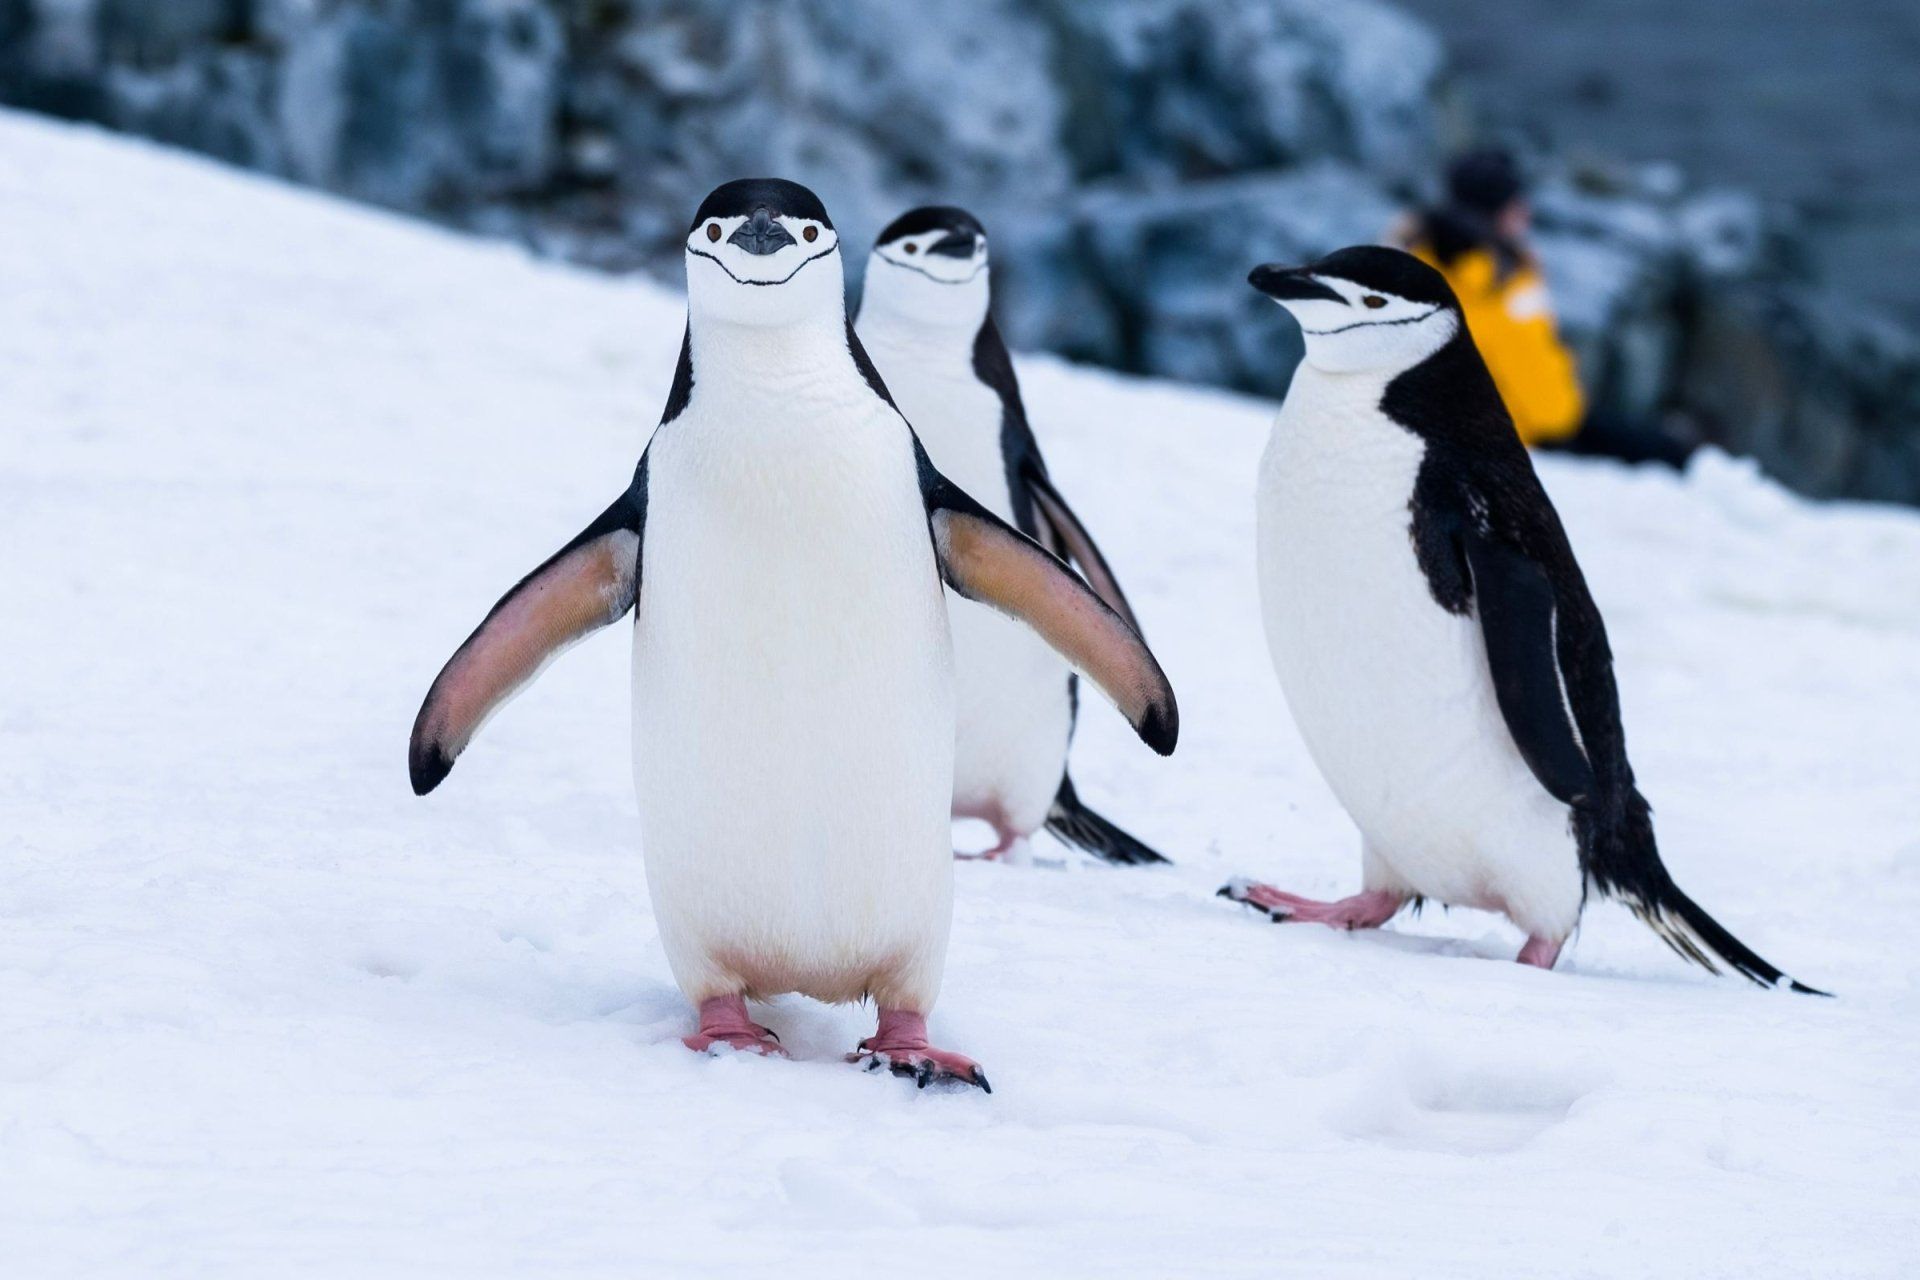 three black and white penguins are standing in the snow